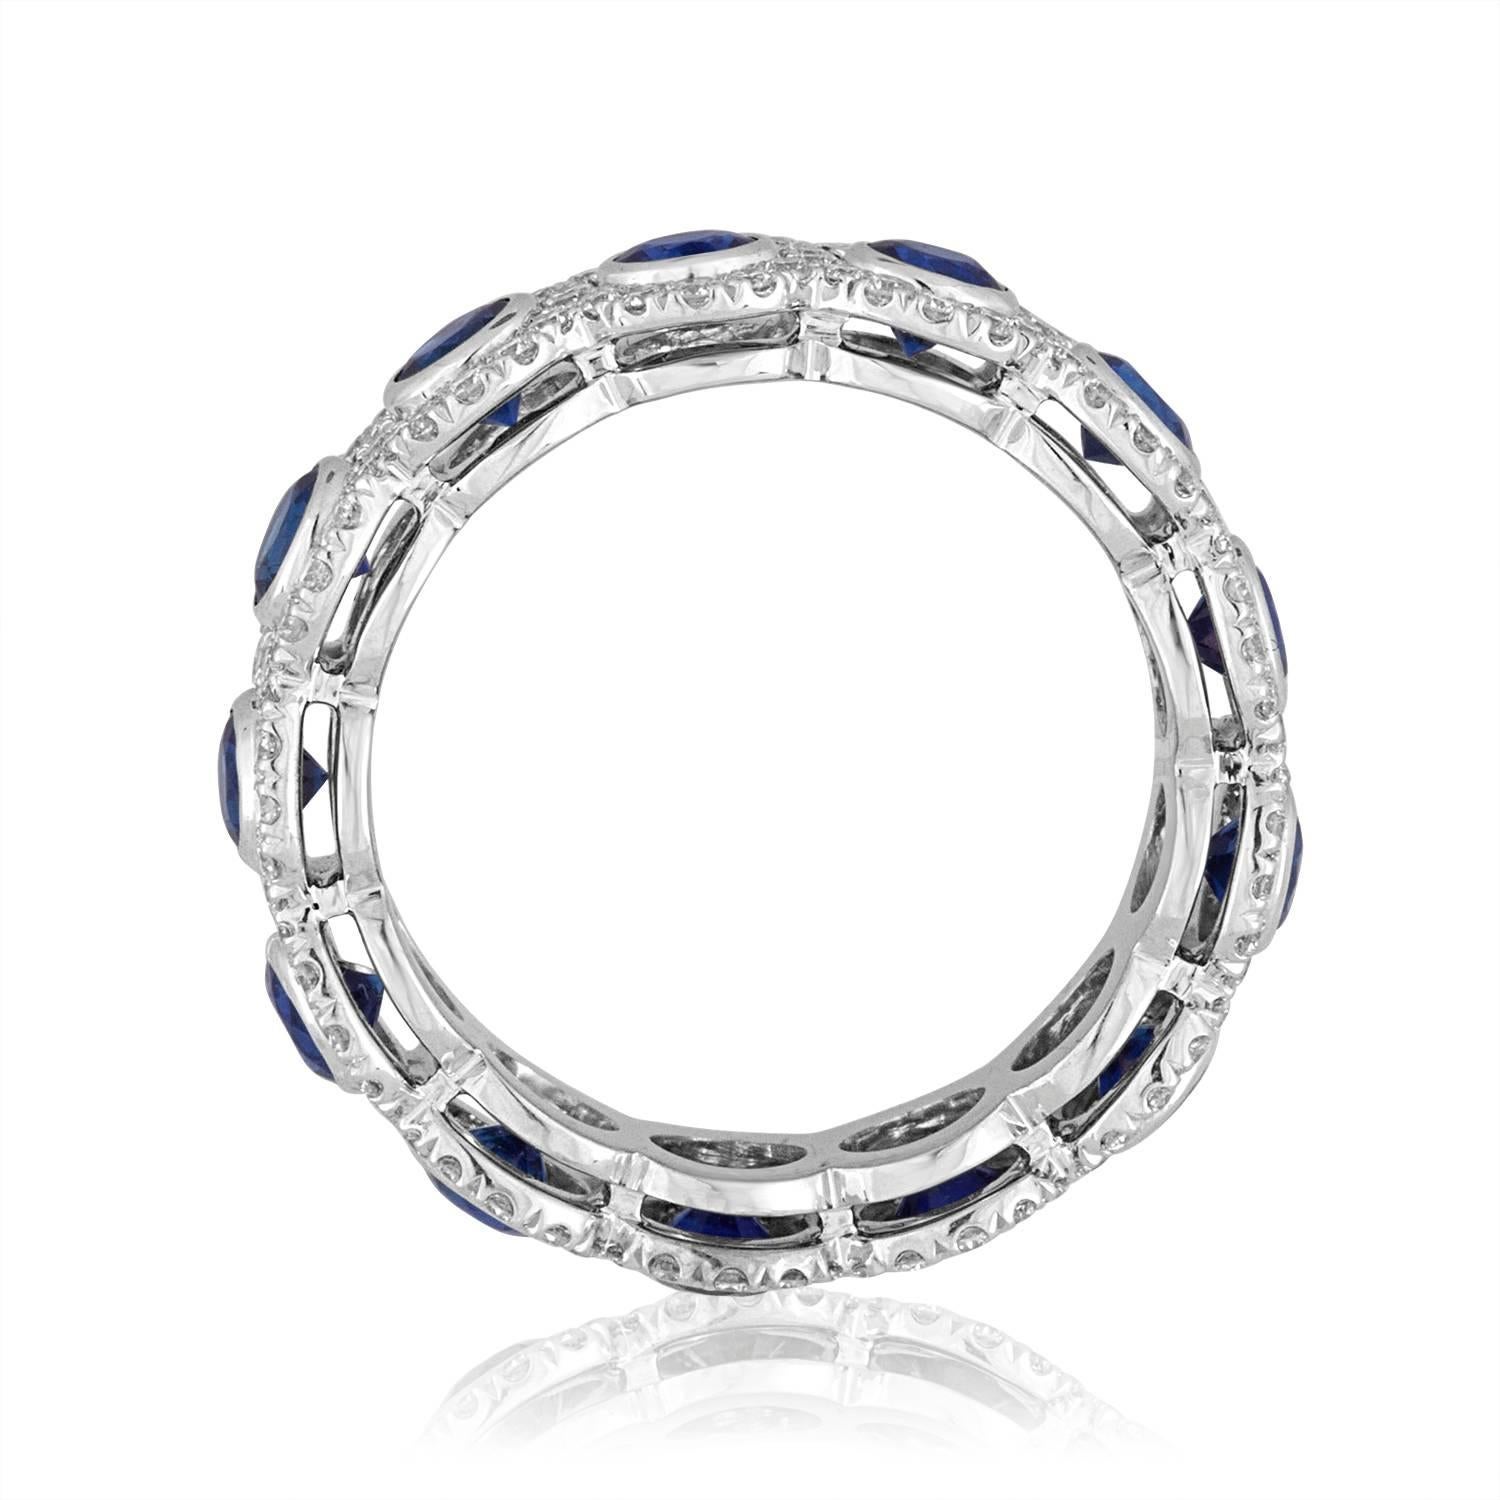 Very Special Eternity Band
This is a Blue Sapphire & Diamonds Band.
The ring is 18K White Gold.
The ring has 3.09Ct in Natural Blue Sapphires.
There are 1.03Ct in Diamonds F VS
The ring is a size 7, not sizable.
The ring is 0.25